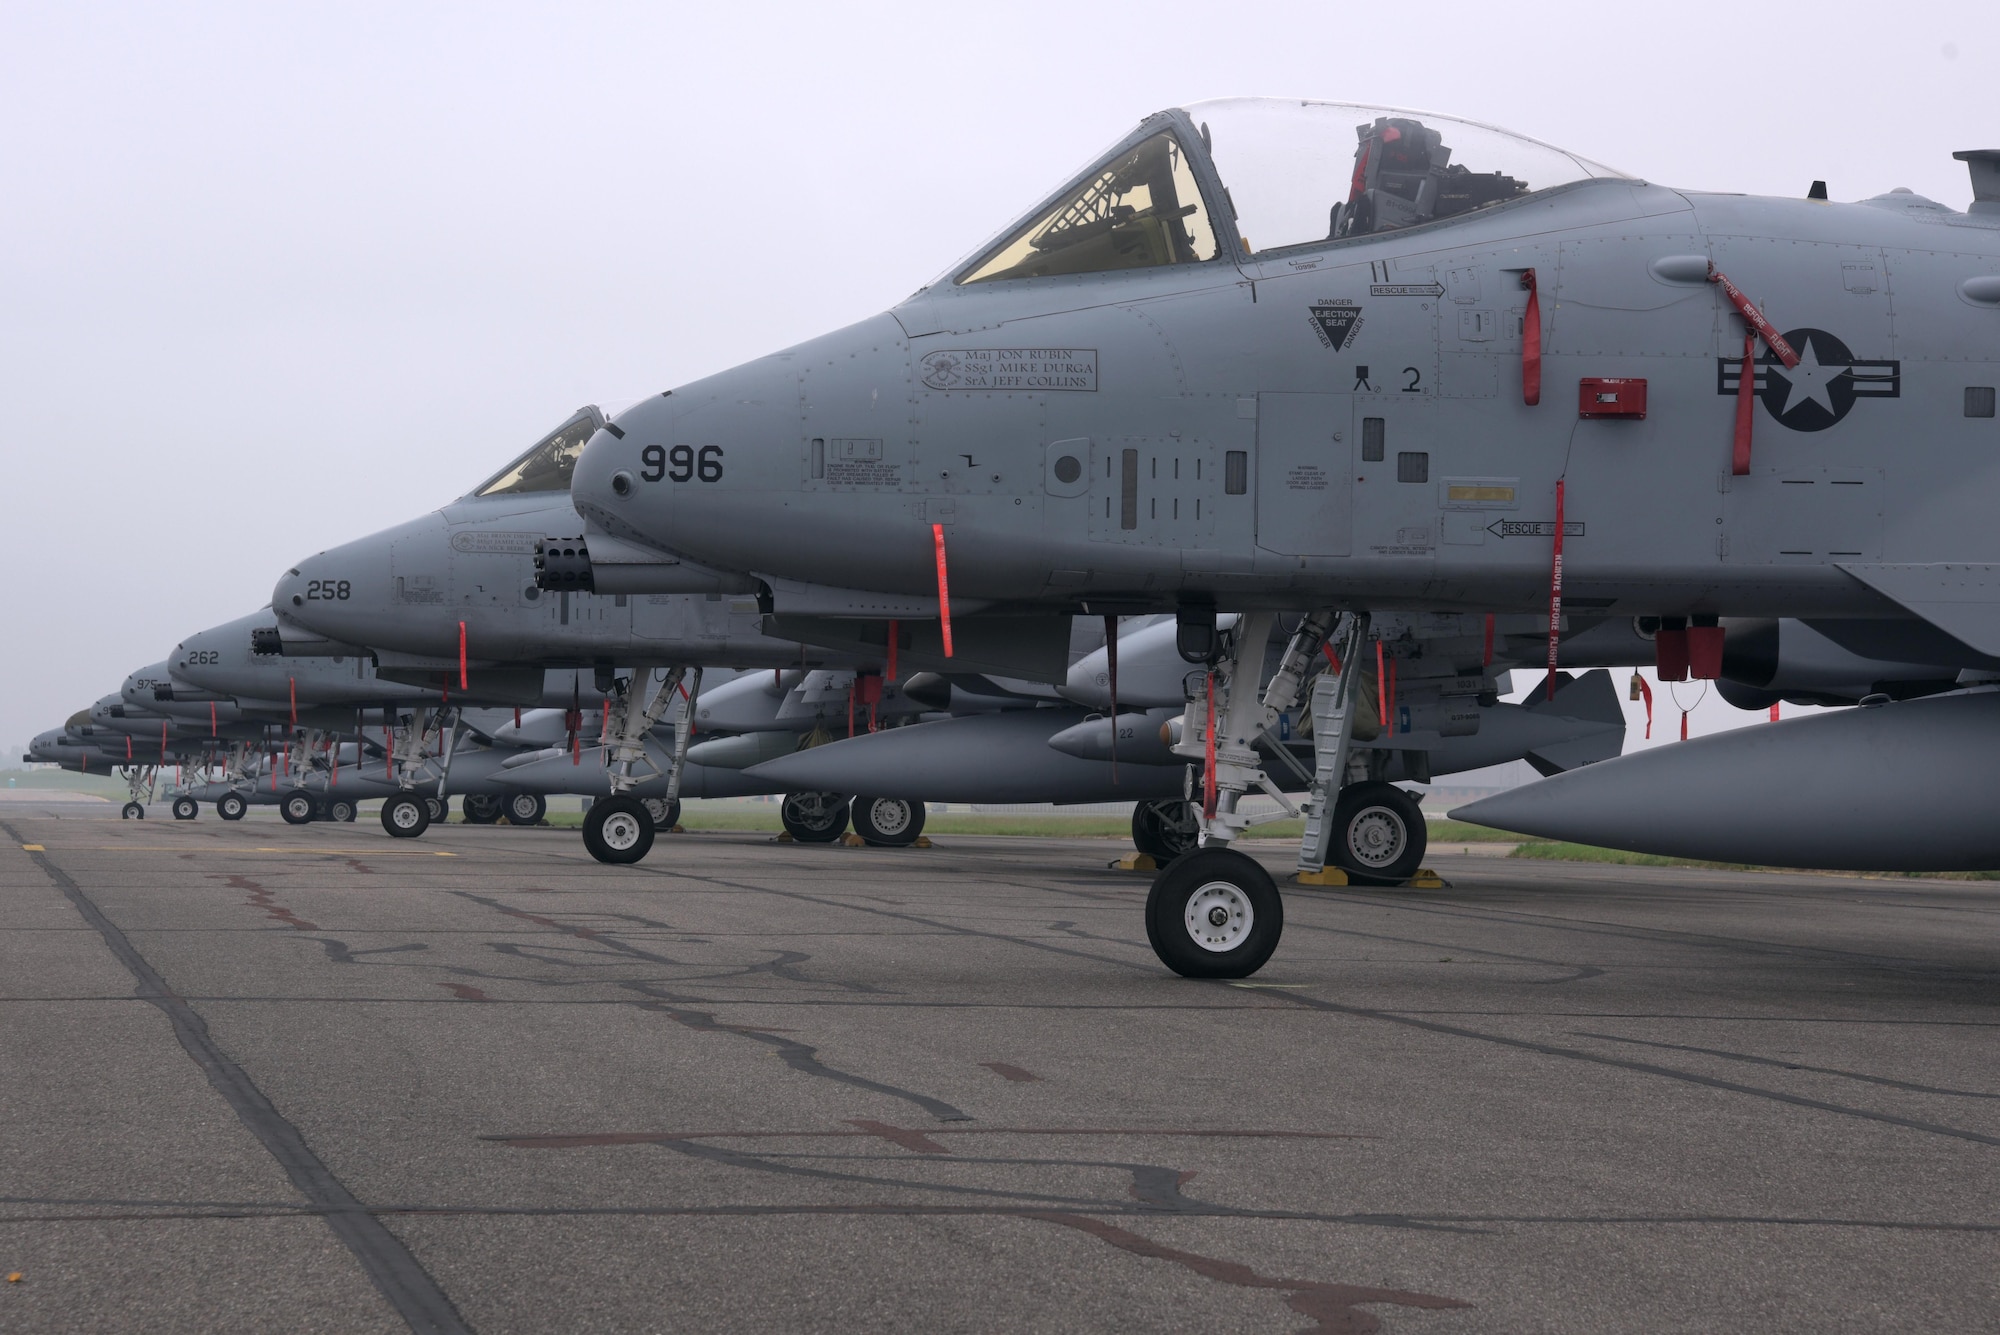 Seven U.S. Air Force A-10 Thunderbolt IIs, from the 127th Wing, Michigan Air National Guard, Selfridge Air National Guard Base, Mich., sit on the flightline at RAF Mildenhall, England, June 1, 2018. The Thunderbolts are passing through RAF Mildenhall on their way to support the U.S. Army Europe-led exercise Saber Strike 2018. Saber Strike 18 promotes regional stability and security while strengthening partner capabilities. (U.S. Air Force photo by Airman 1st Class Benjamin Cooper)